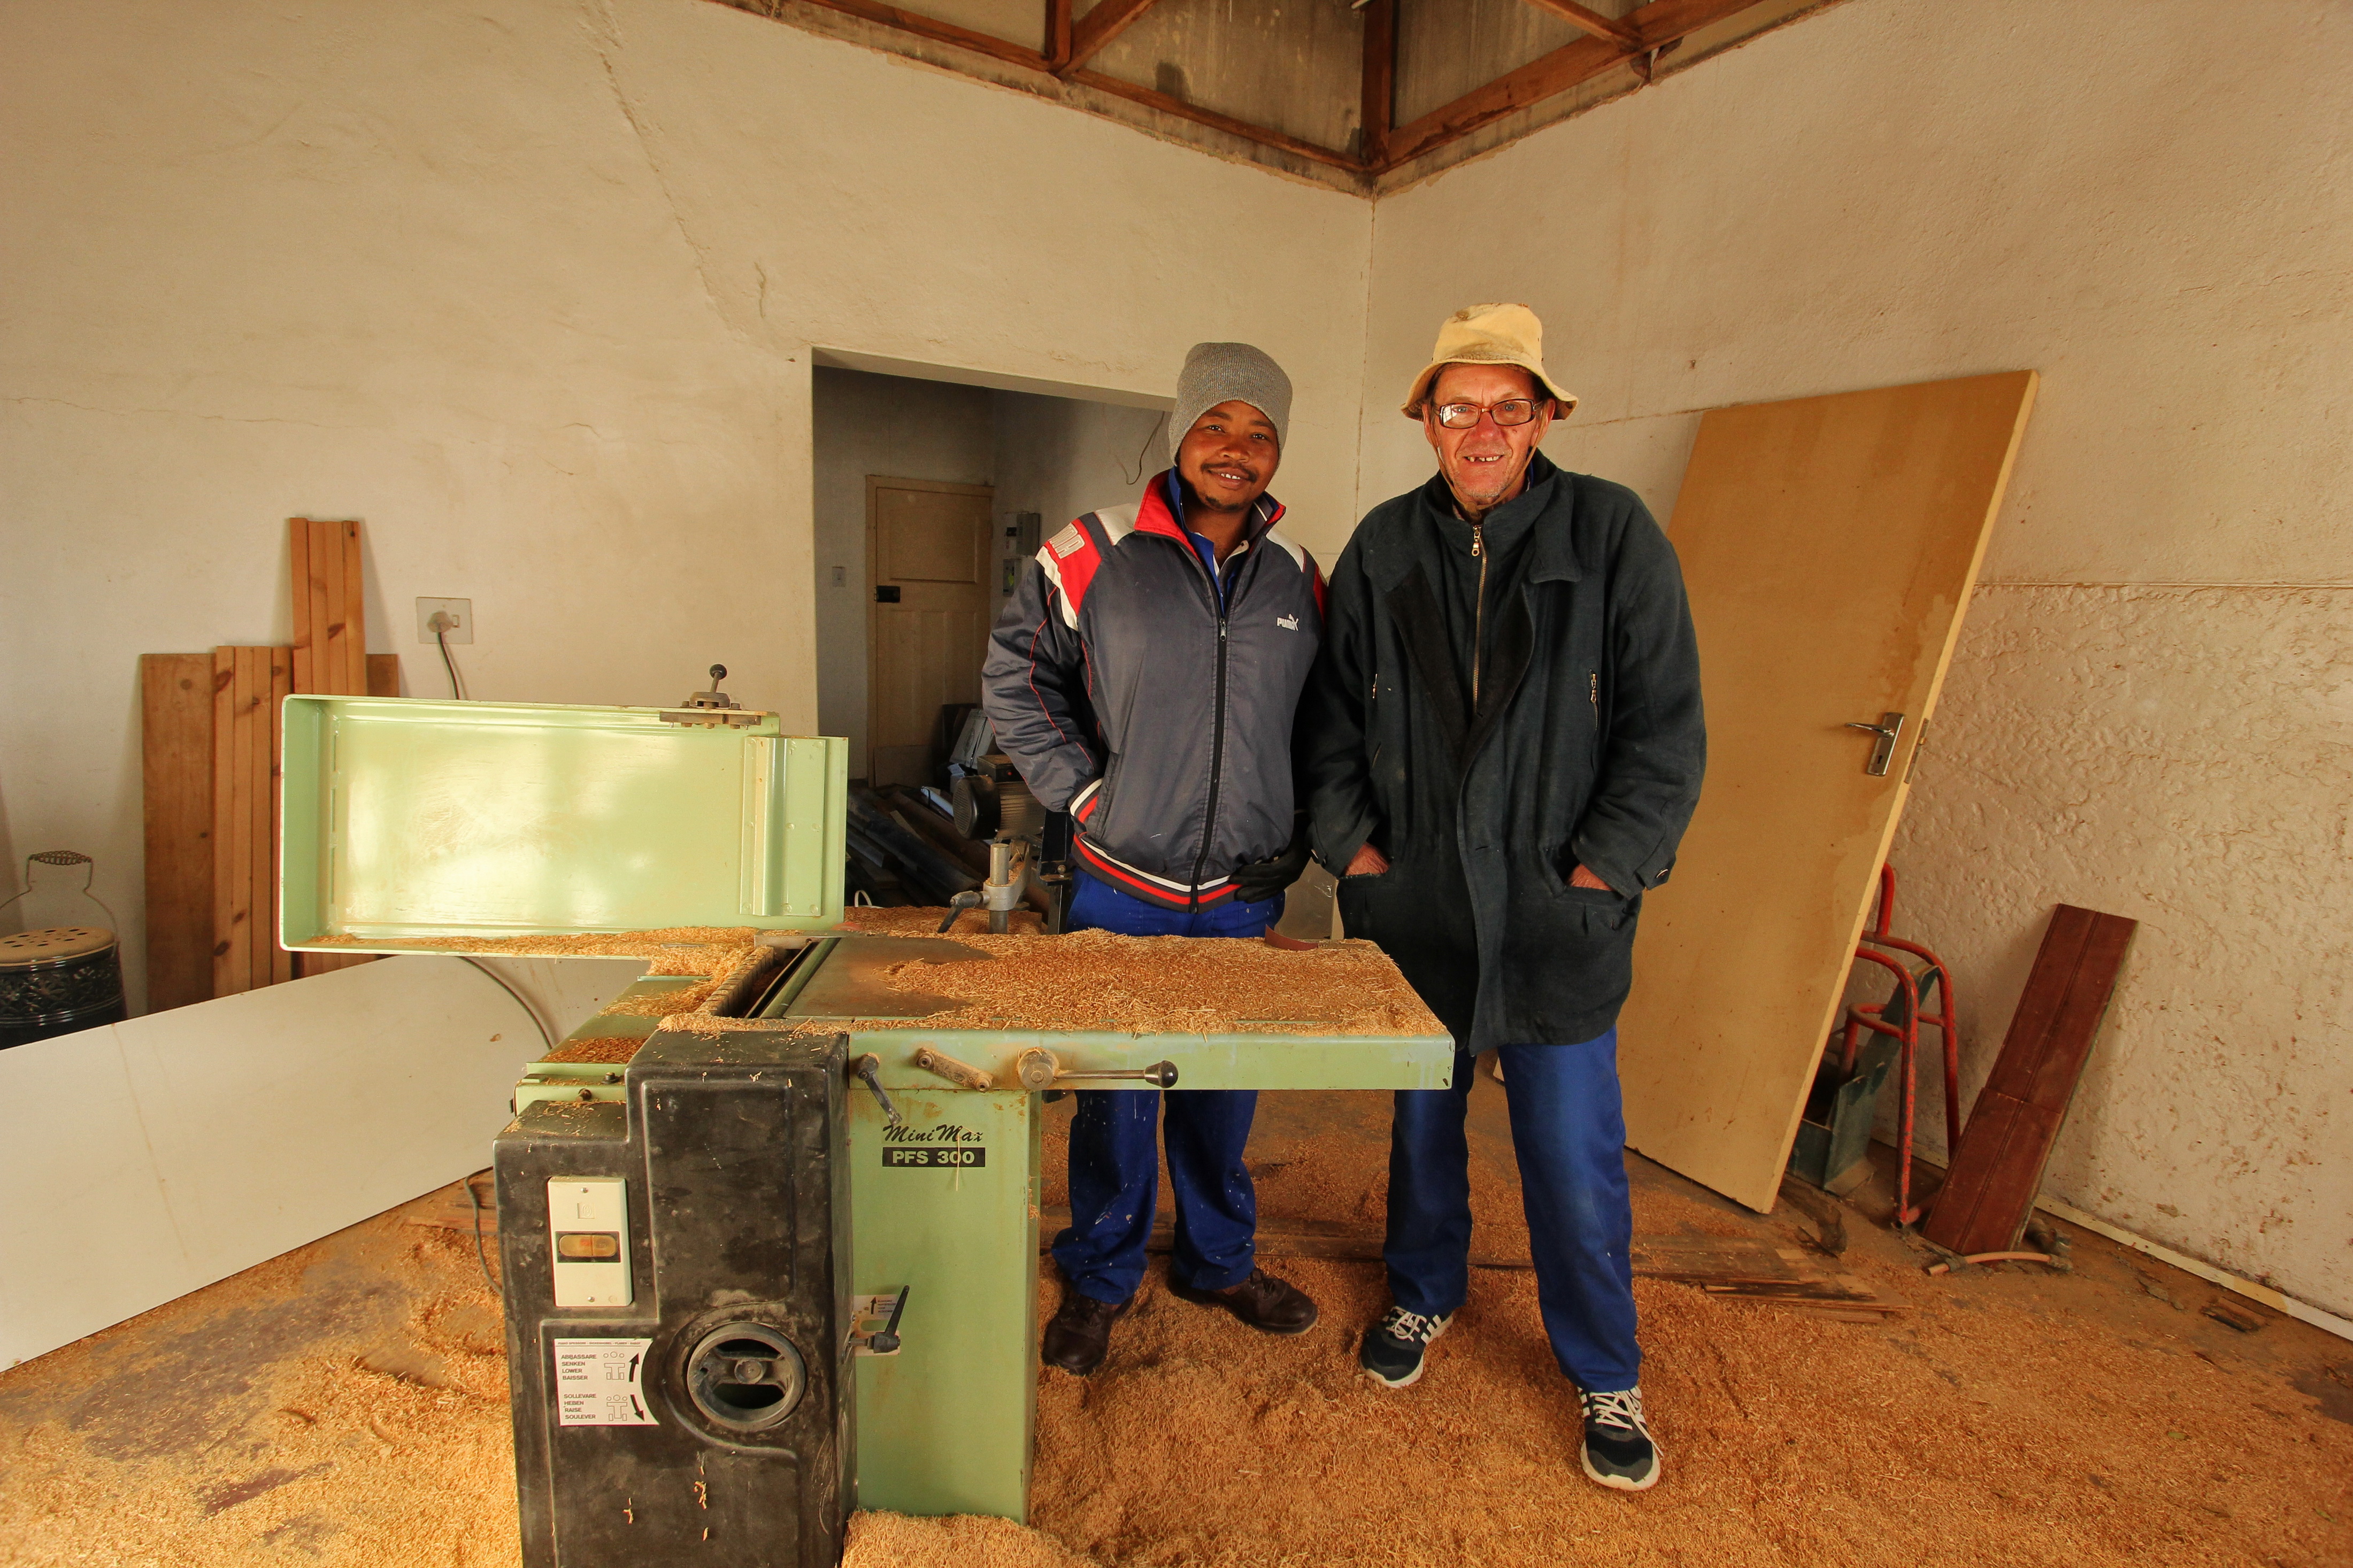 Busy in the workshop – Brandon Johnson and Anthony Cohen. Image: Chris Marais